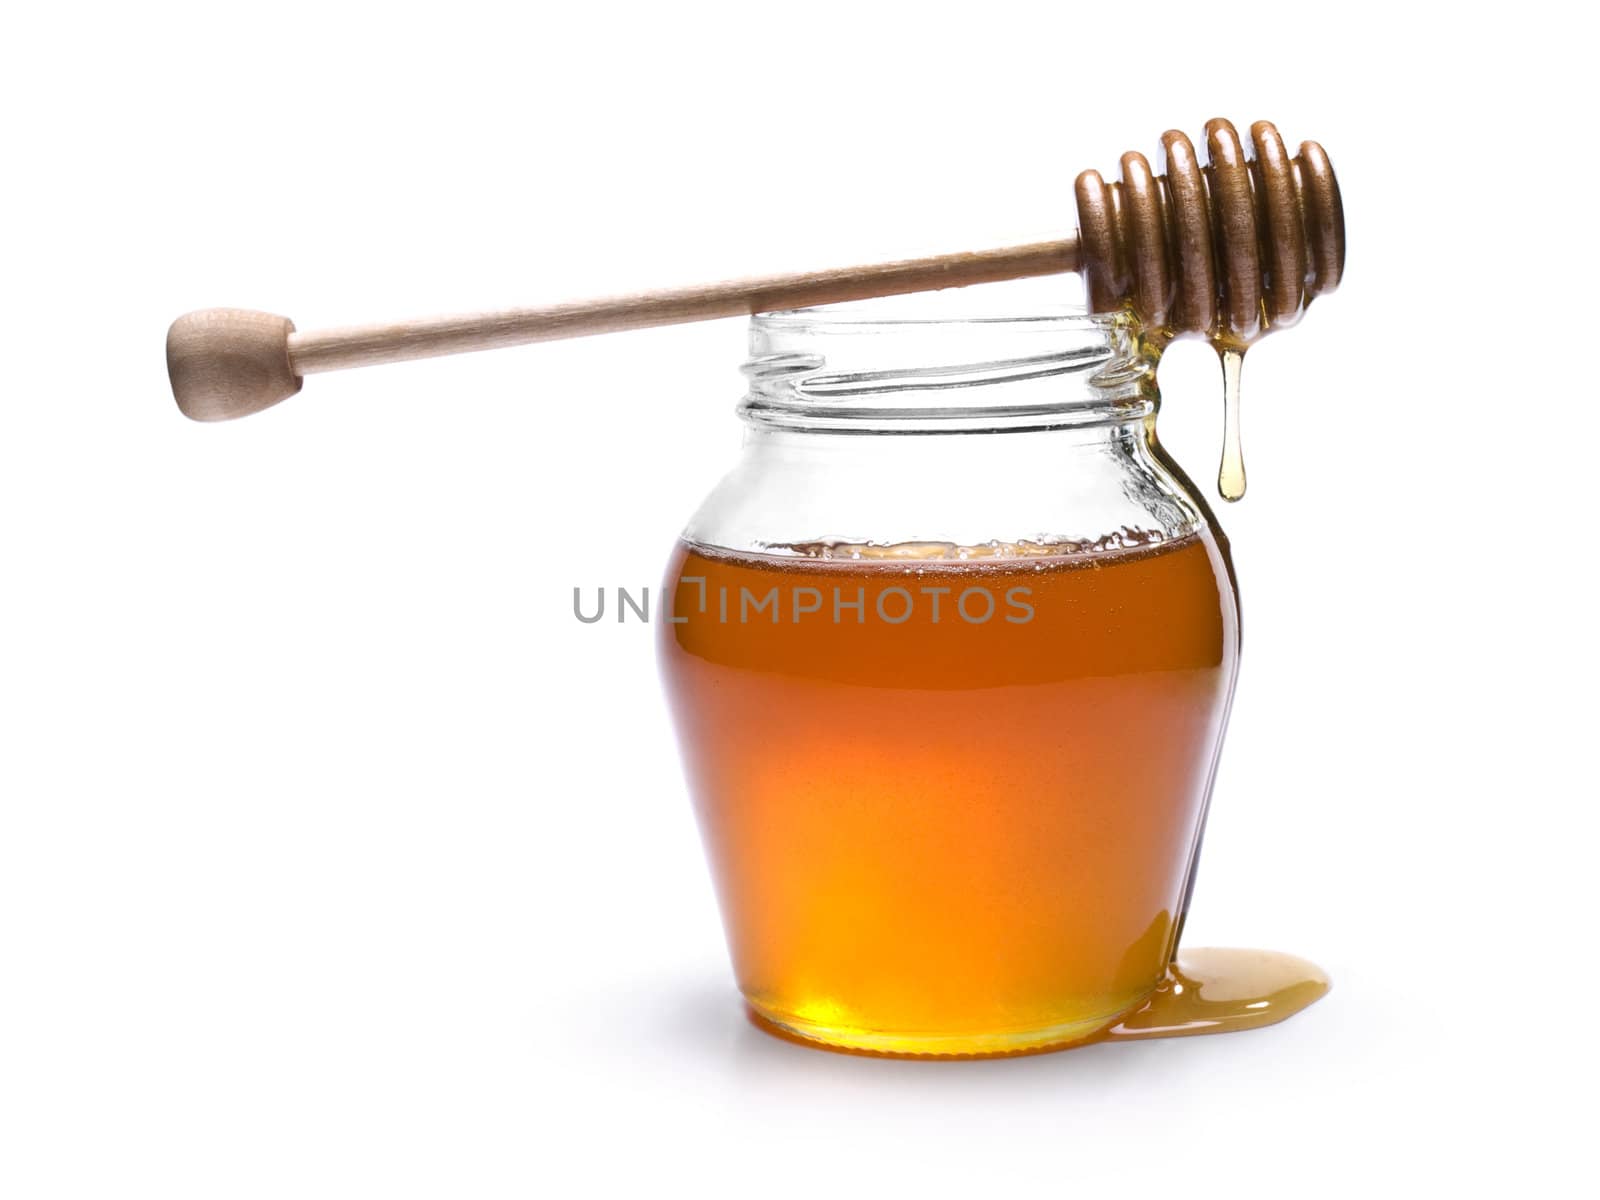 Jar of honey with a wooden drizzler on top. Isolated on white background.